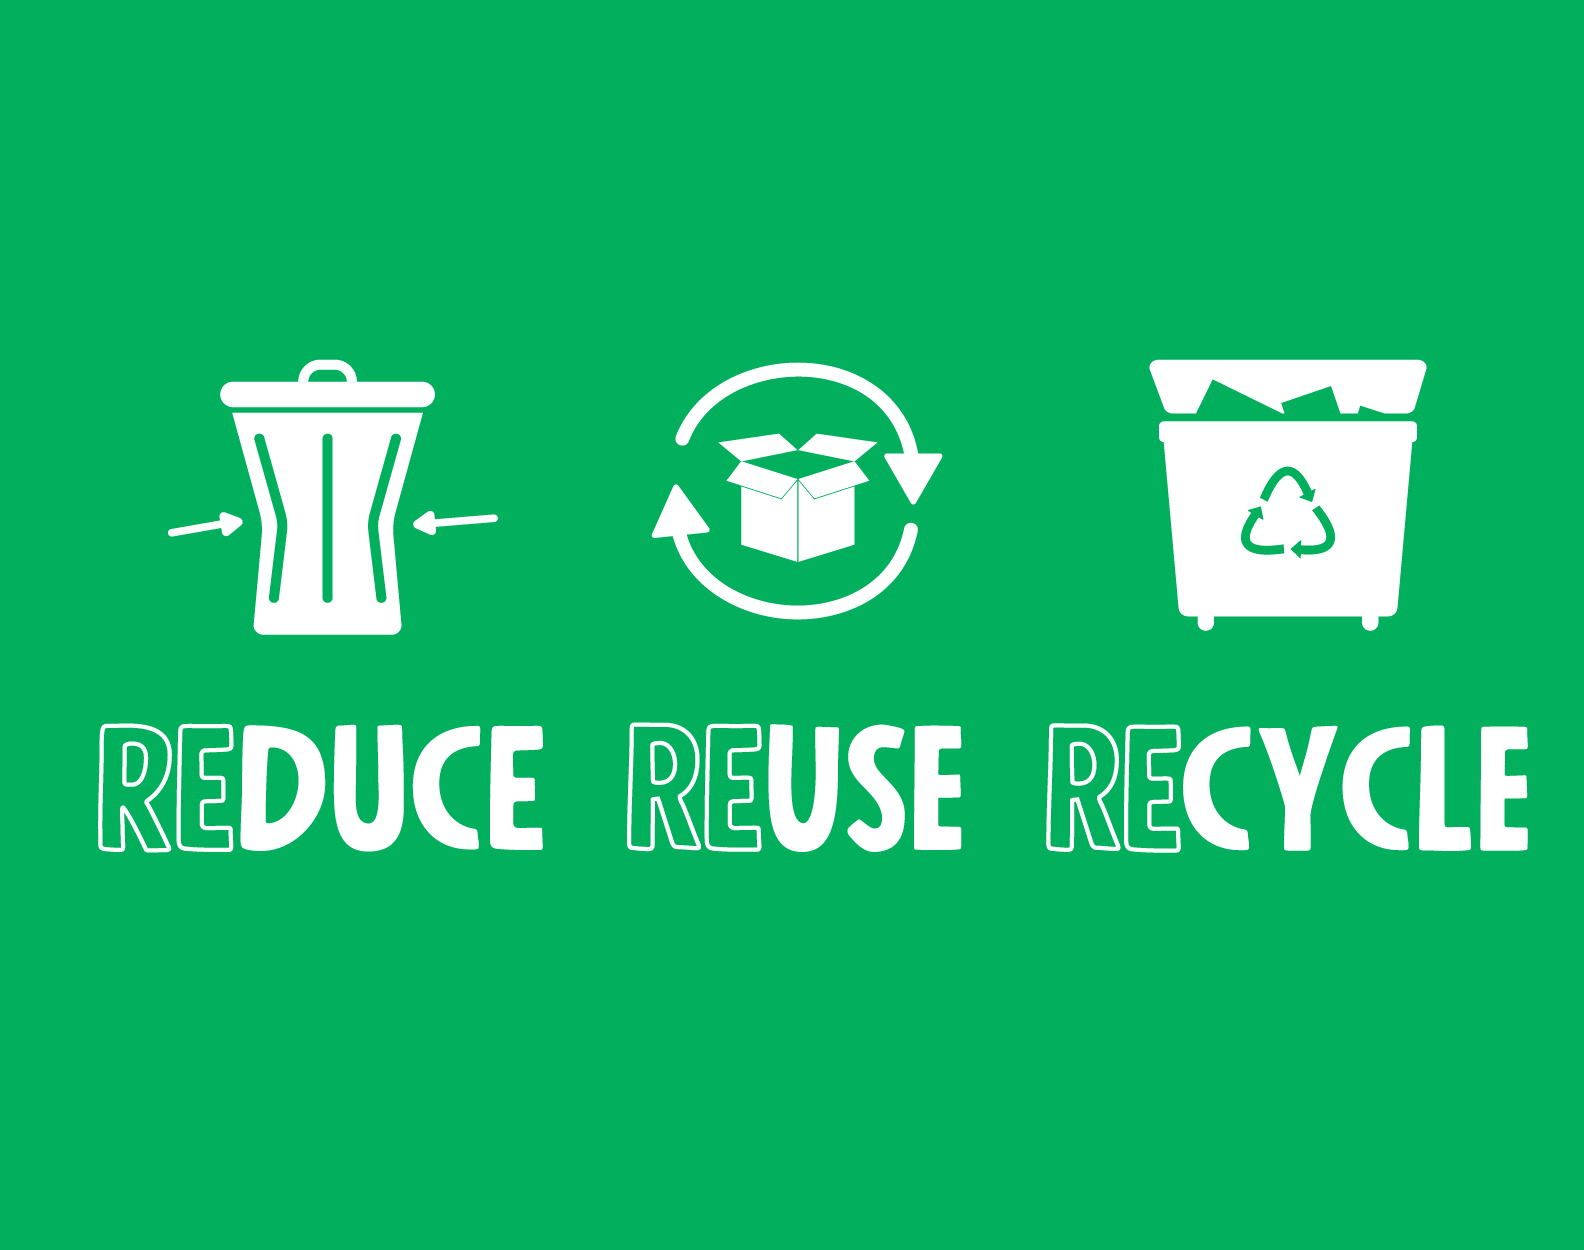 reduce reuse recycle image